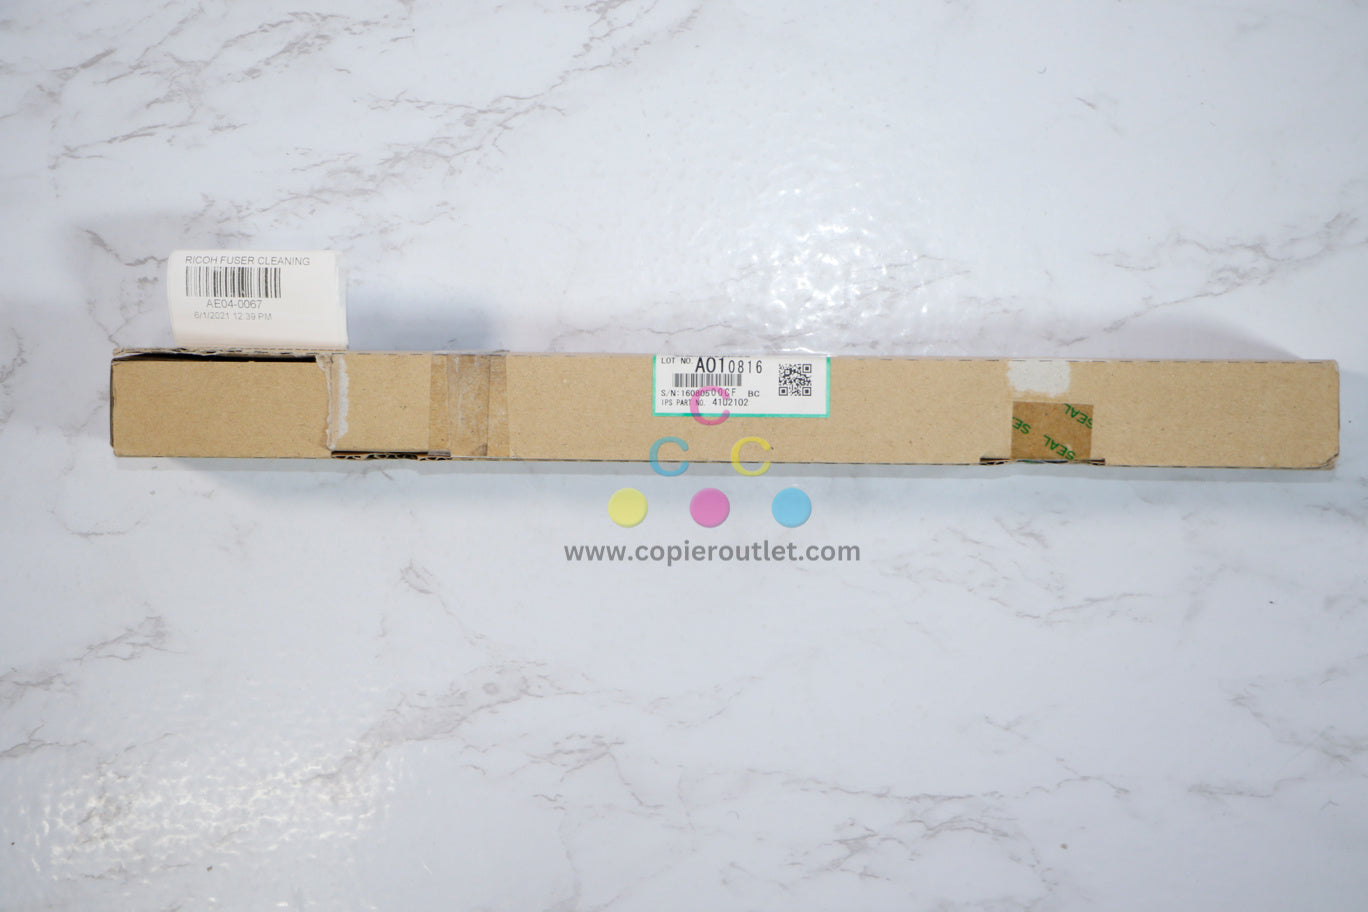 New OEM Ricoh MP1100,MP1350, MP9000 Fuser Cleaning Felt Roller AE04-0067(AE040067)